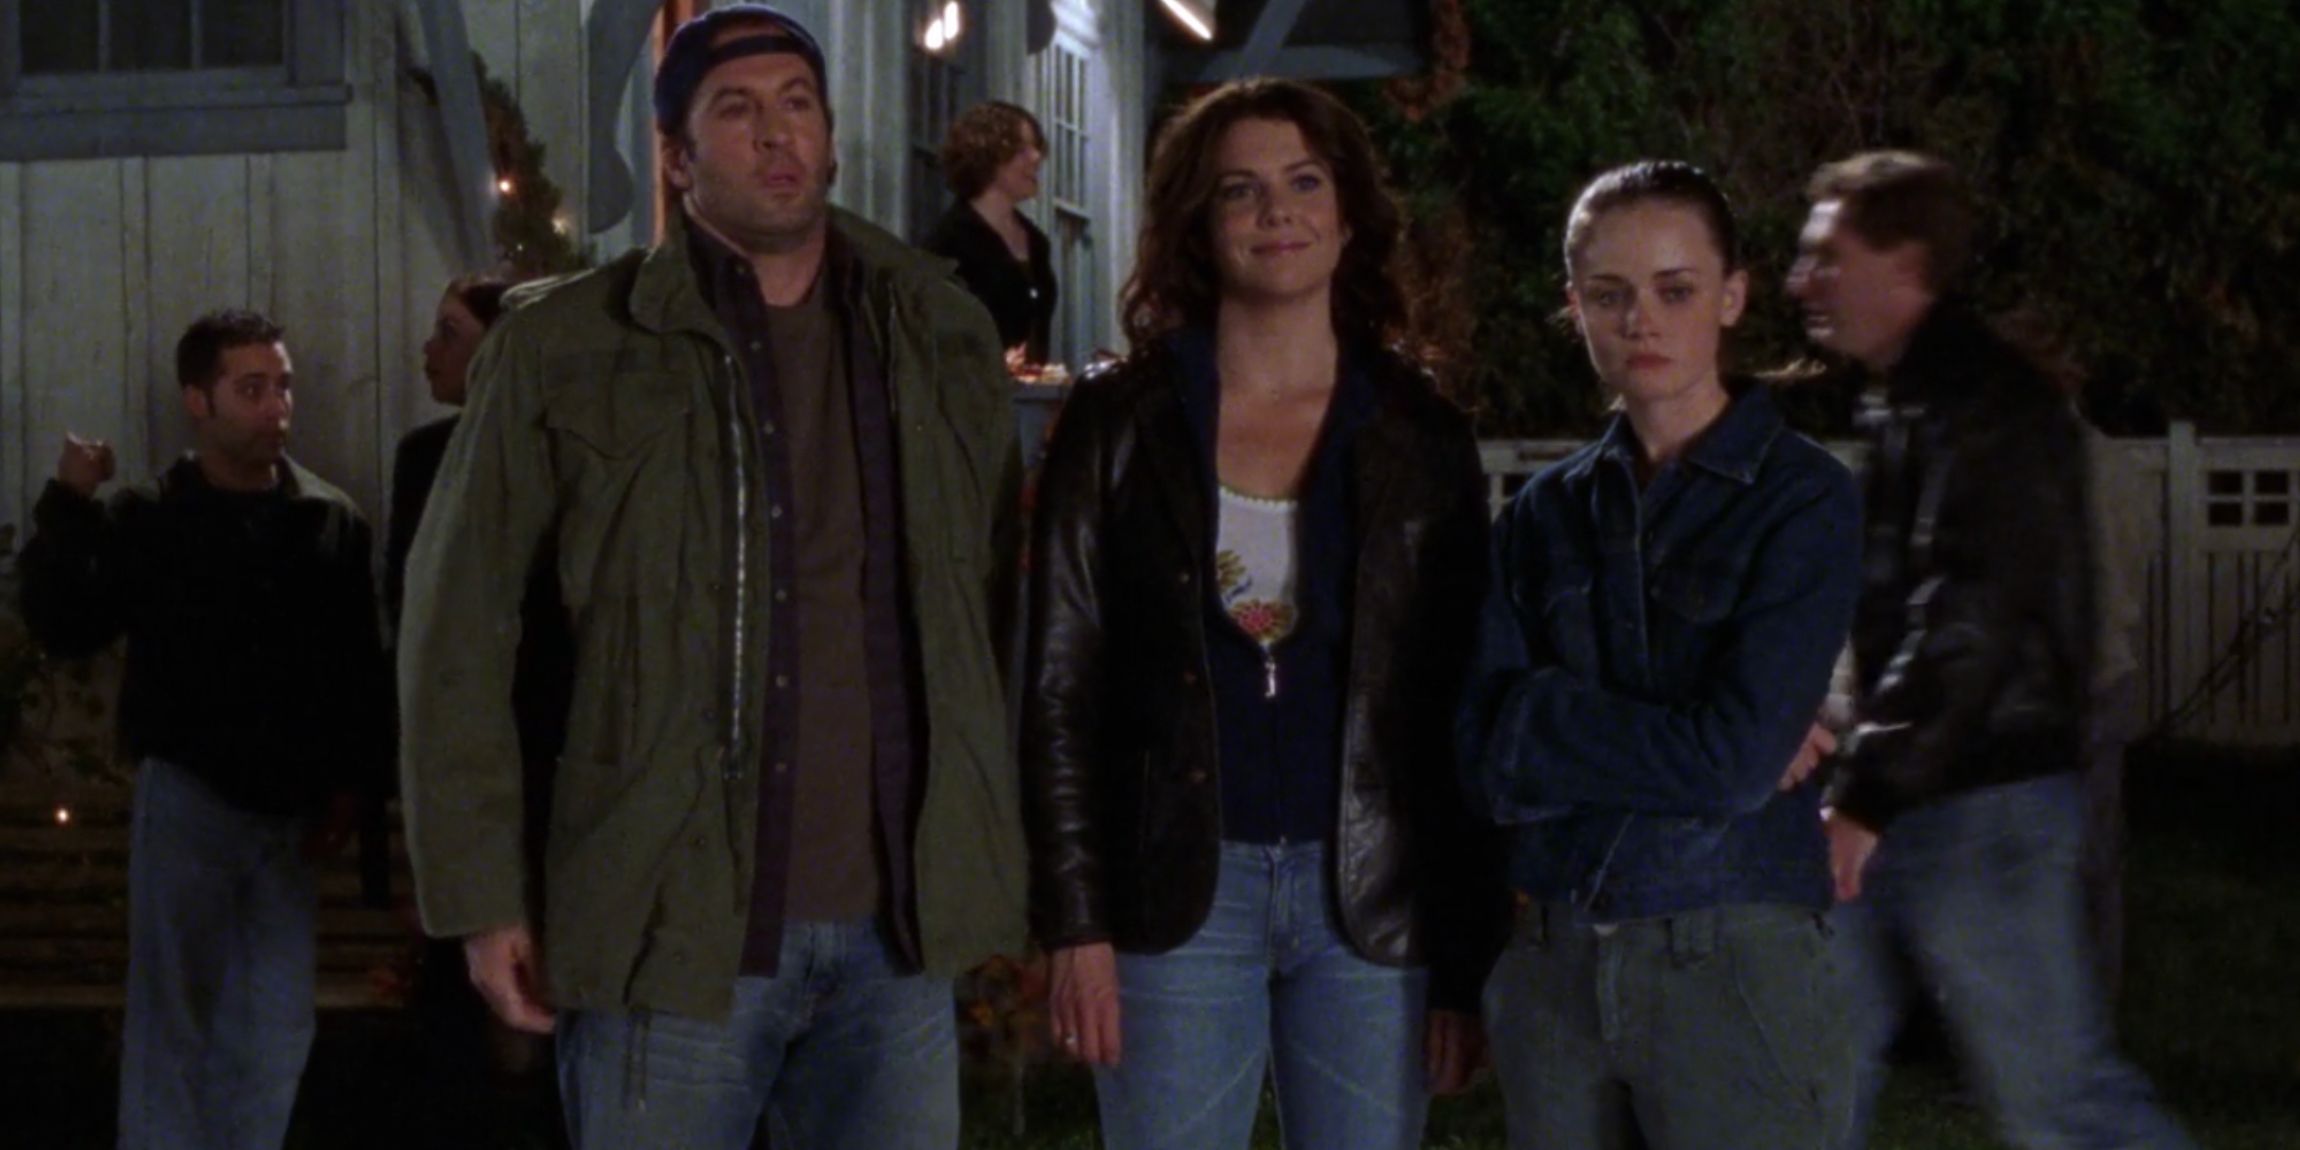 Luke, Lorelai, and Rory outside of a town hall meeting in Gilmore Girls